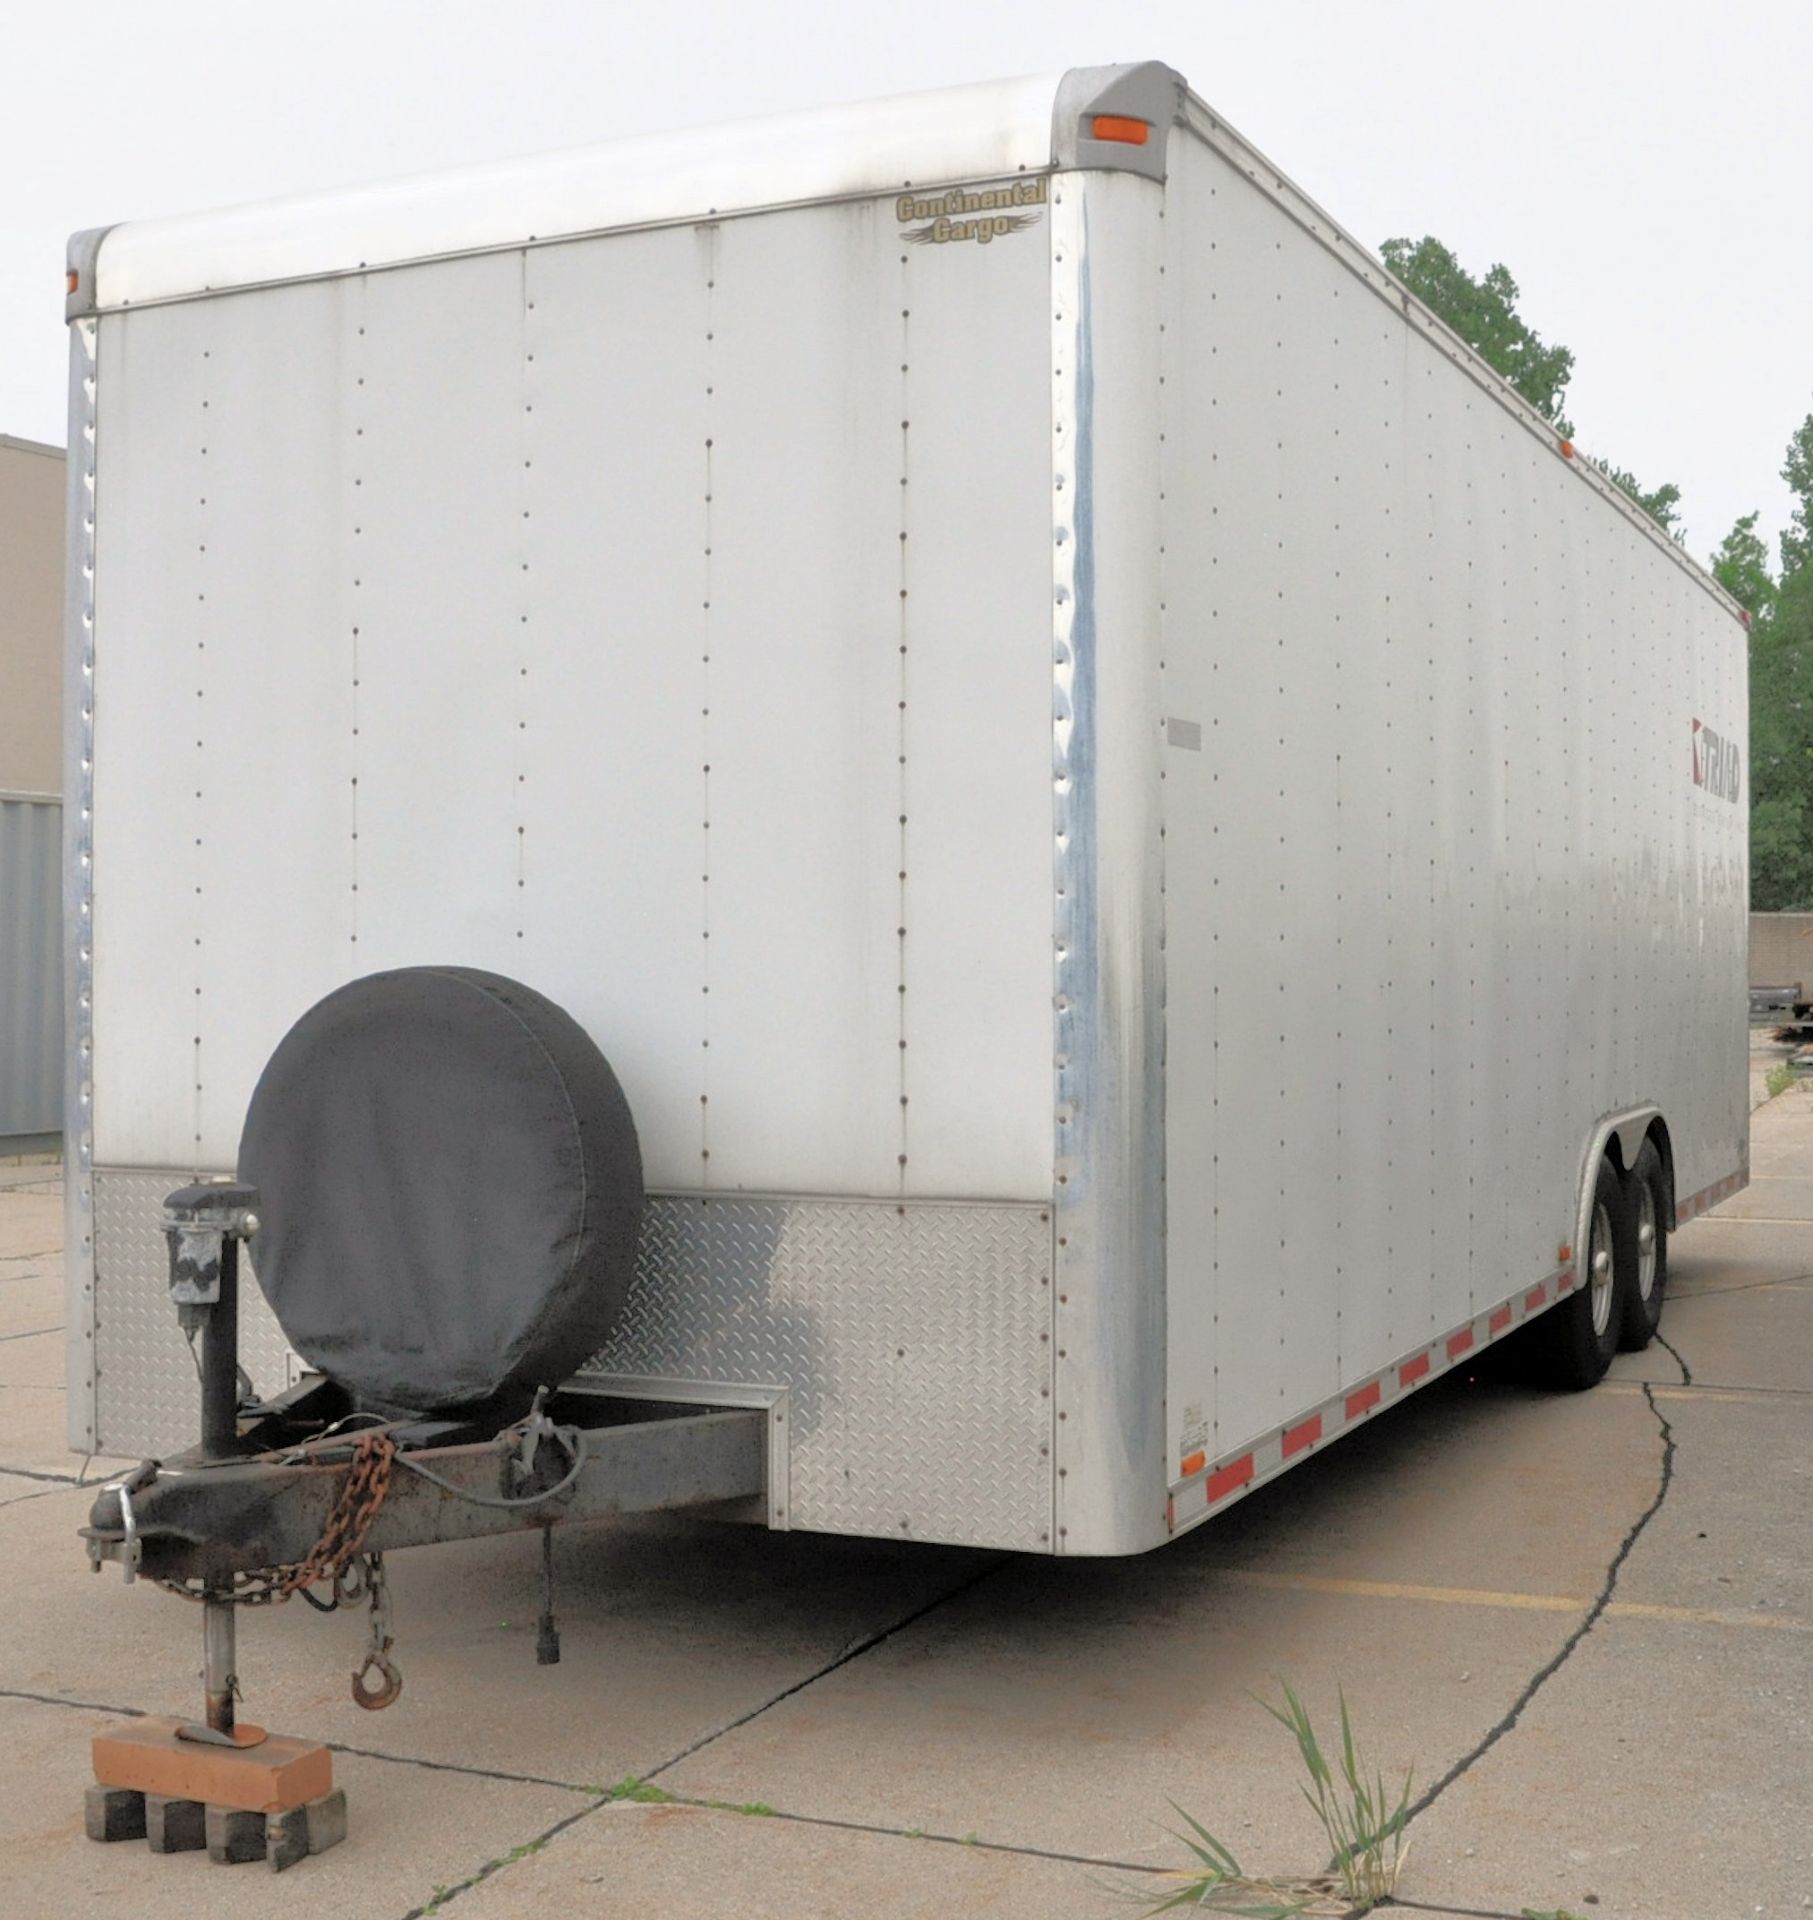 2006 Forest River Model AM8.526TA4, 26'L x 8'W x 8'H Tandem Axle Enclosed Utility Trailer - Image 3 of 7